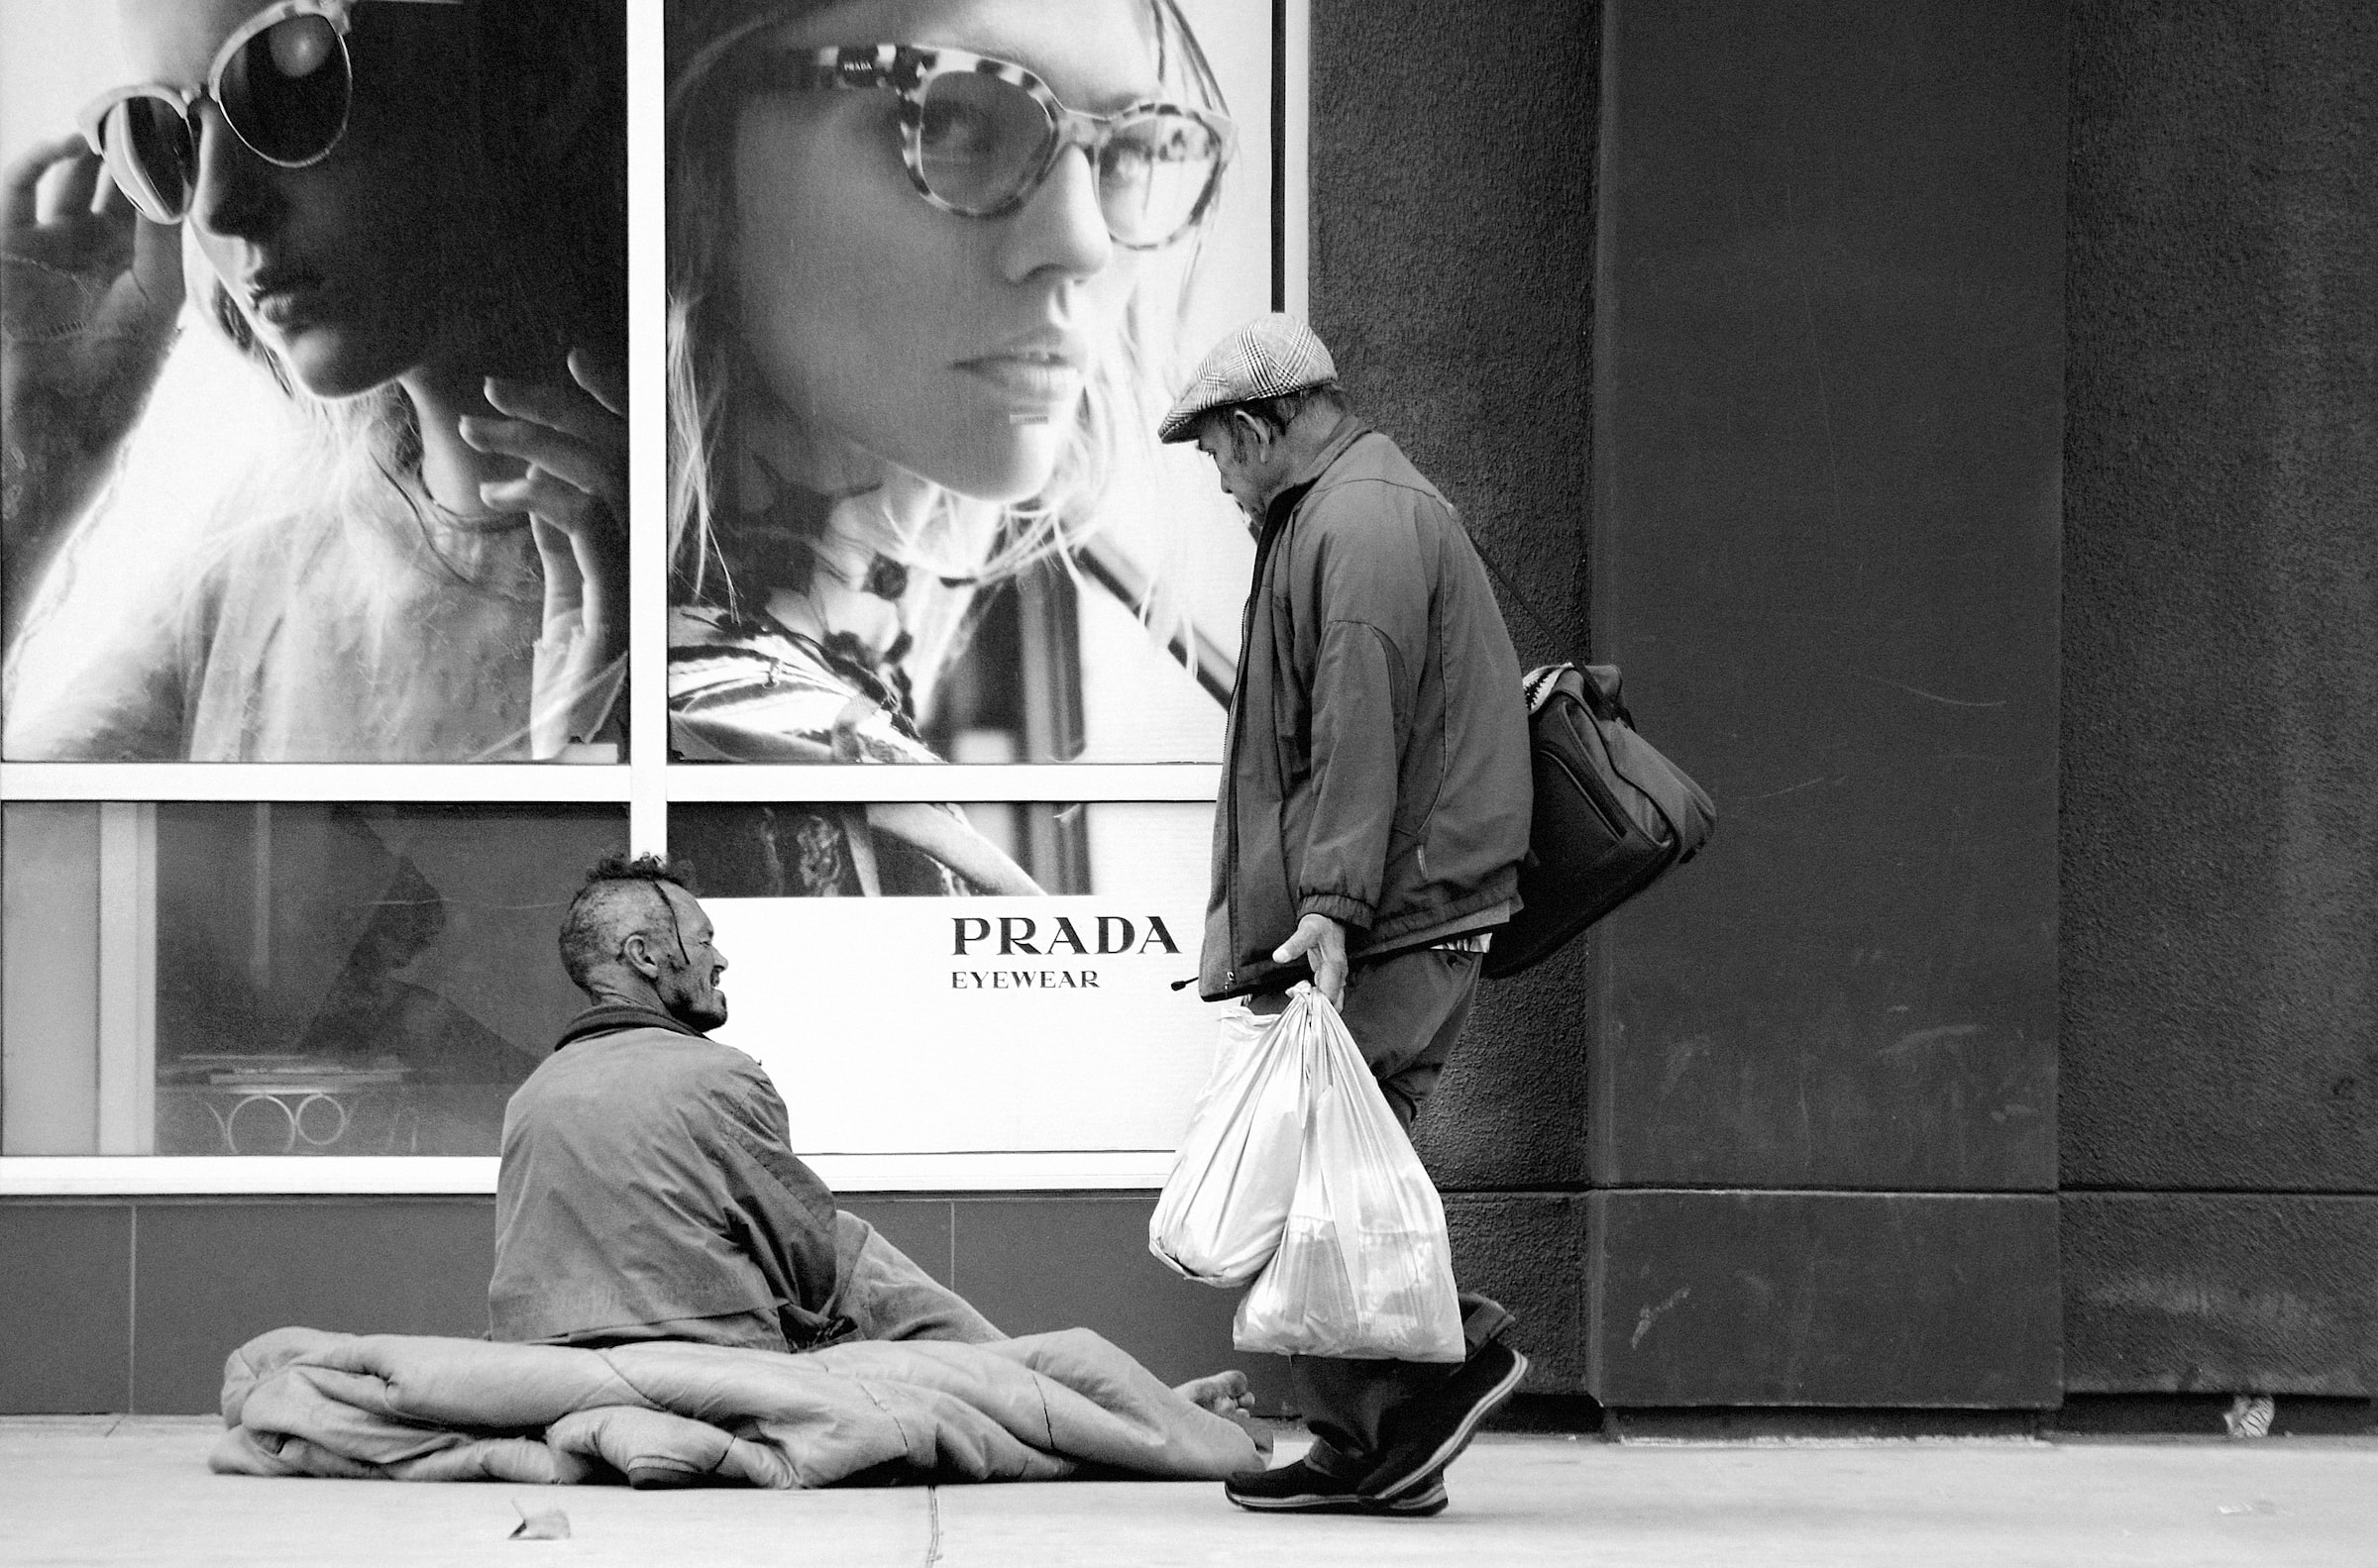 An unhoused man camps on the sidewalk in front of a Prada store in Los Angeles.